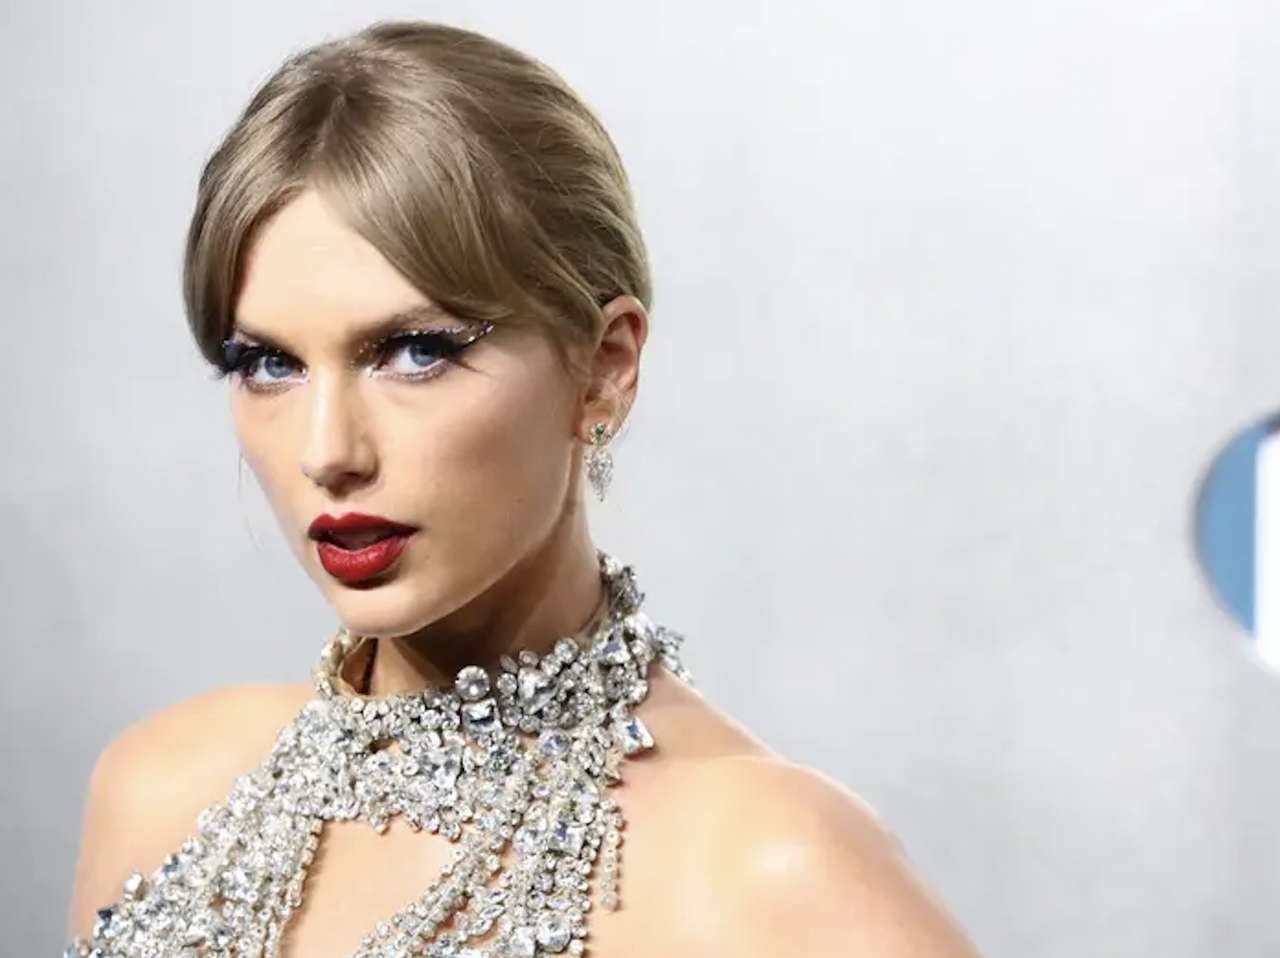 Taylor Swift puzzle online